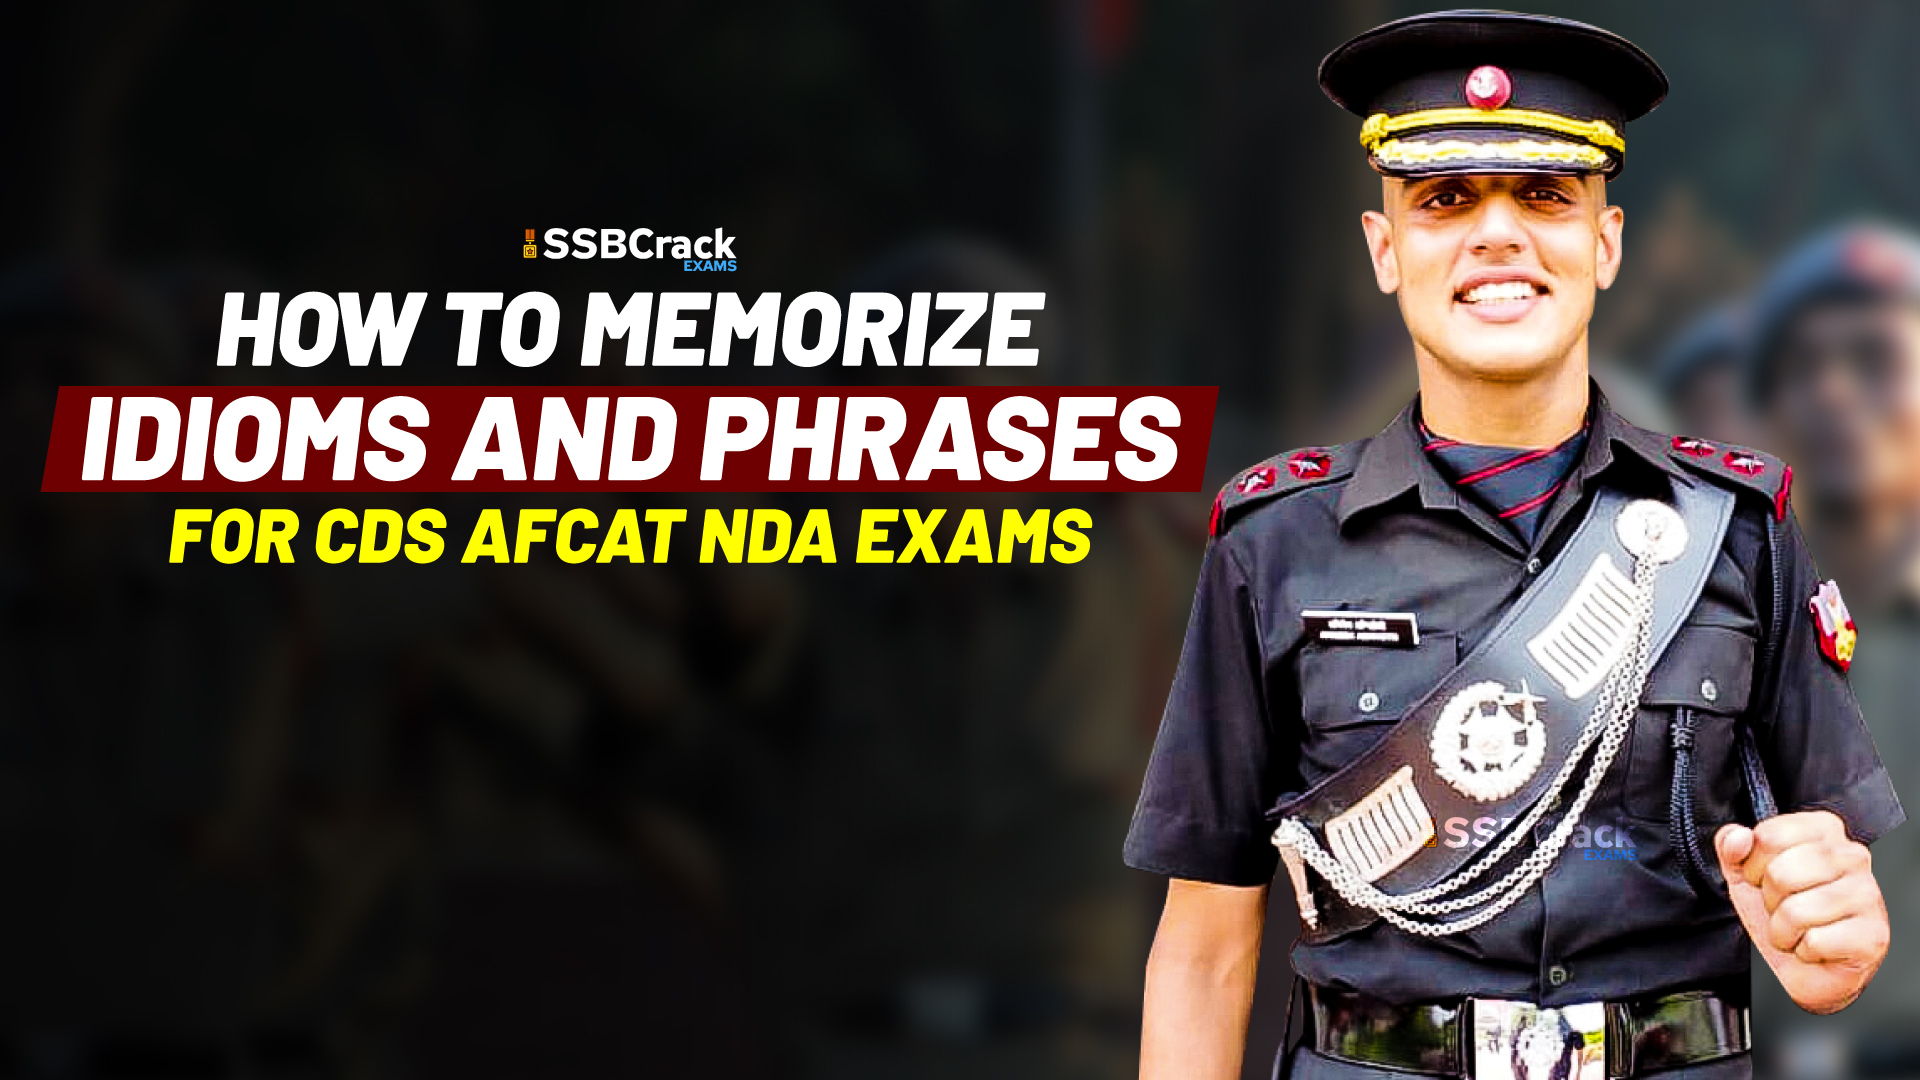 1000+ Most Commonly Asked Synonyms & Antonyms For NDA CDS AFCAT Exam  [DOWNLOAD PDF]